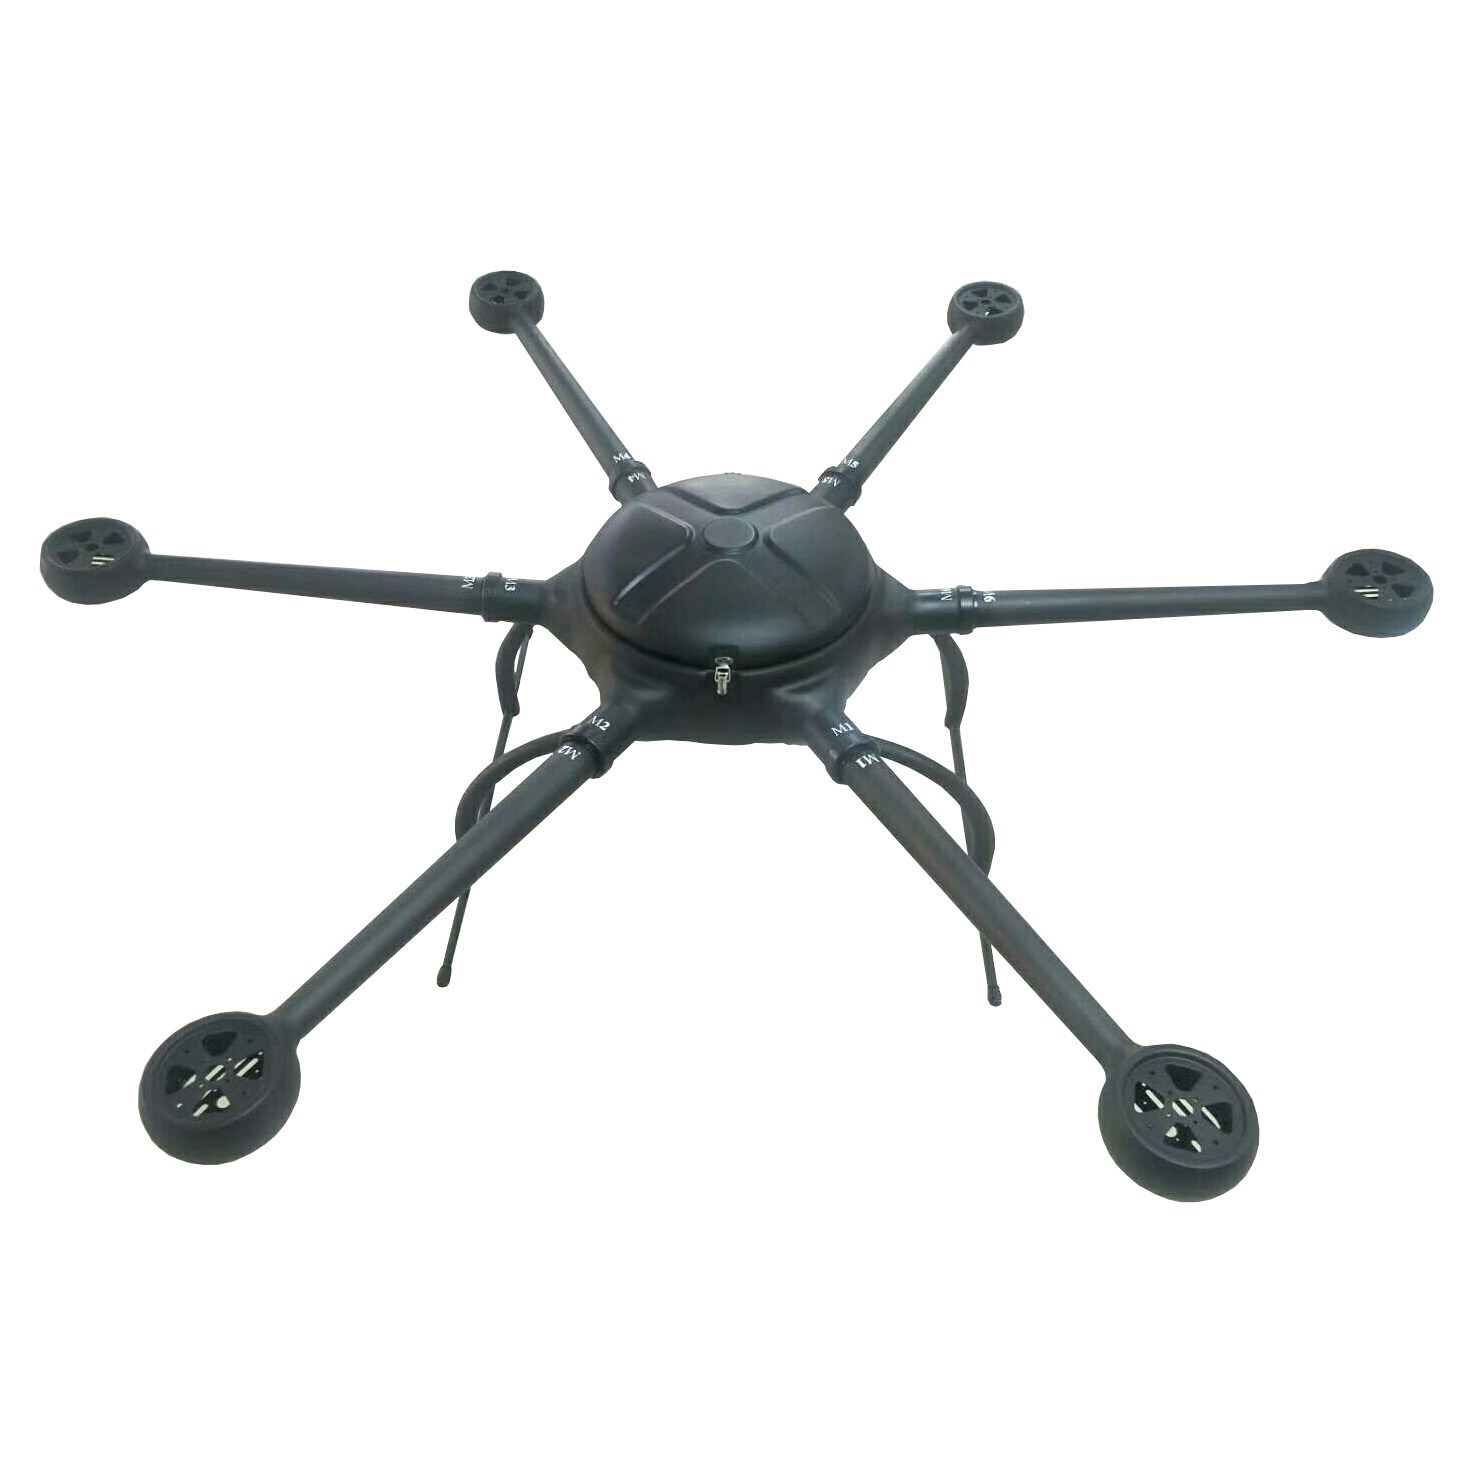 FD1600 industrial drone frame